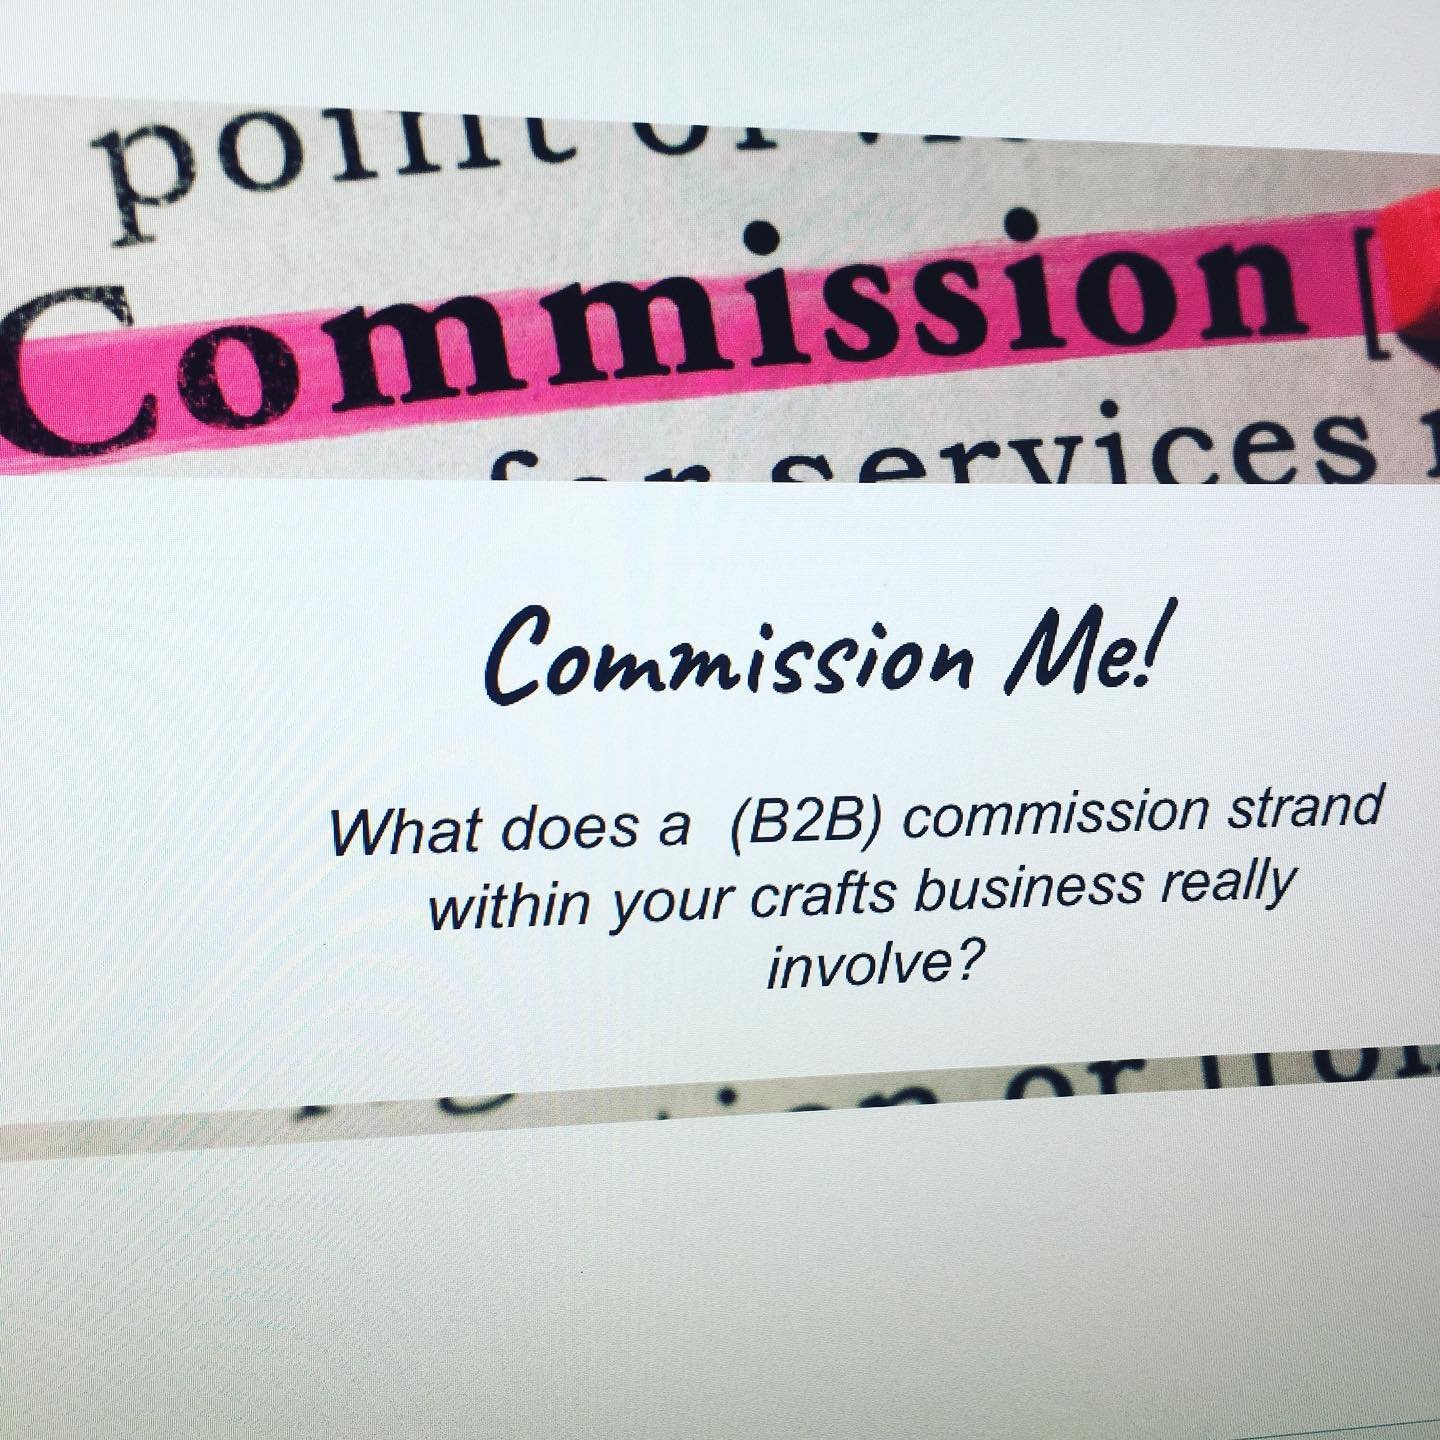 I got the opportunity to support some wonderful craft businesses @cockpitstudios yesterday. Three hour workshop that flew by. Zooming in and out on what is the opportunity to develop and manage a #commission activity within your business. 

A big tha